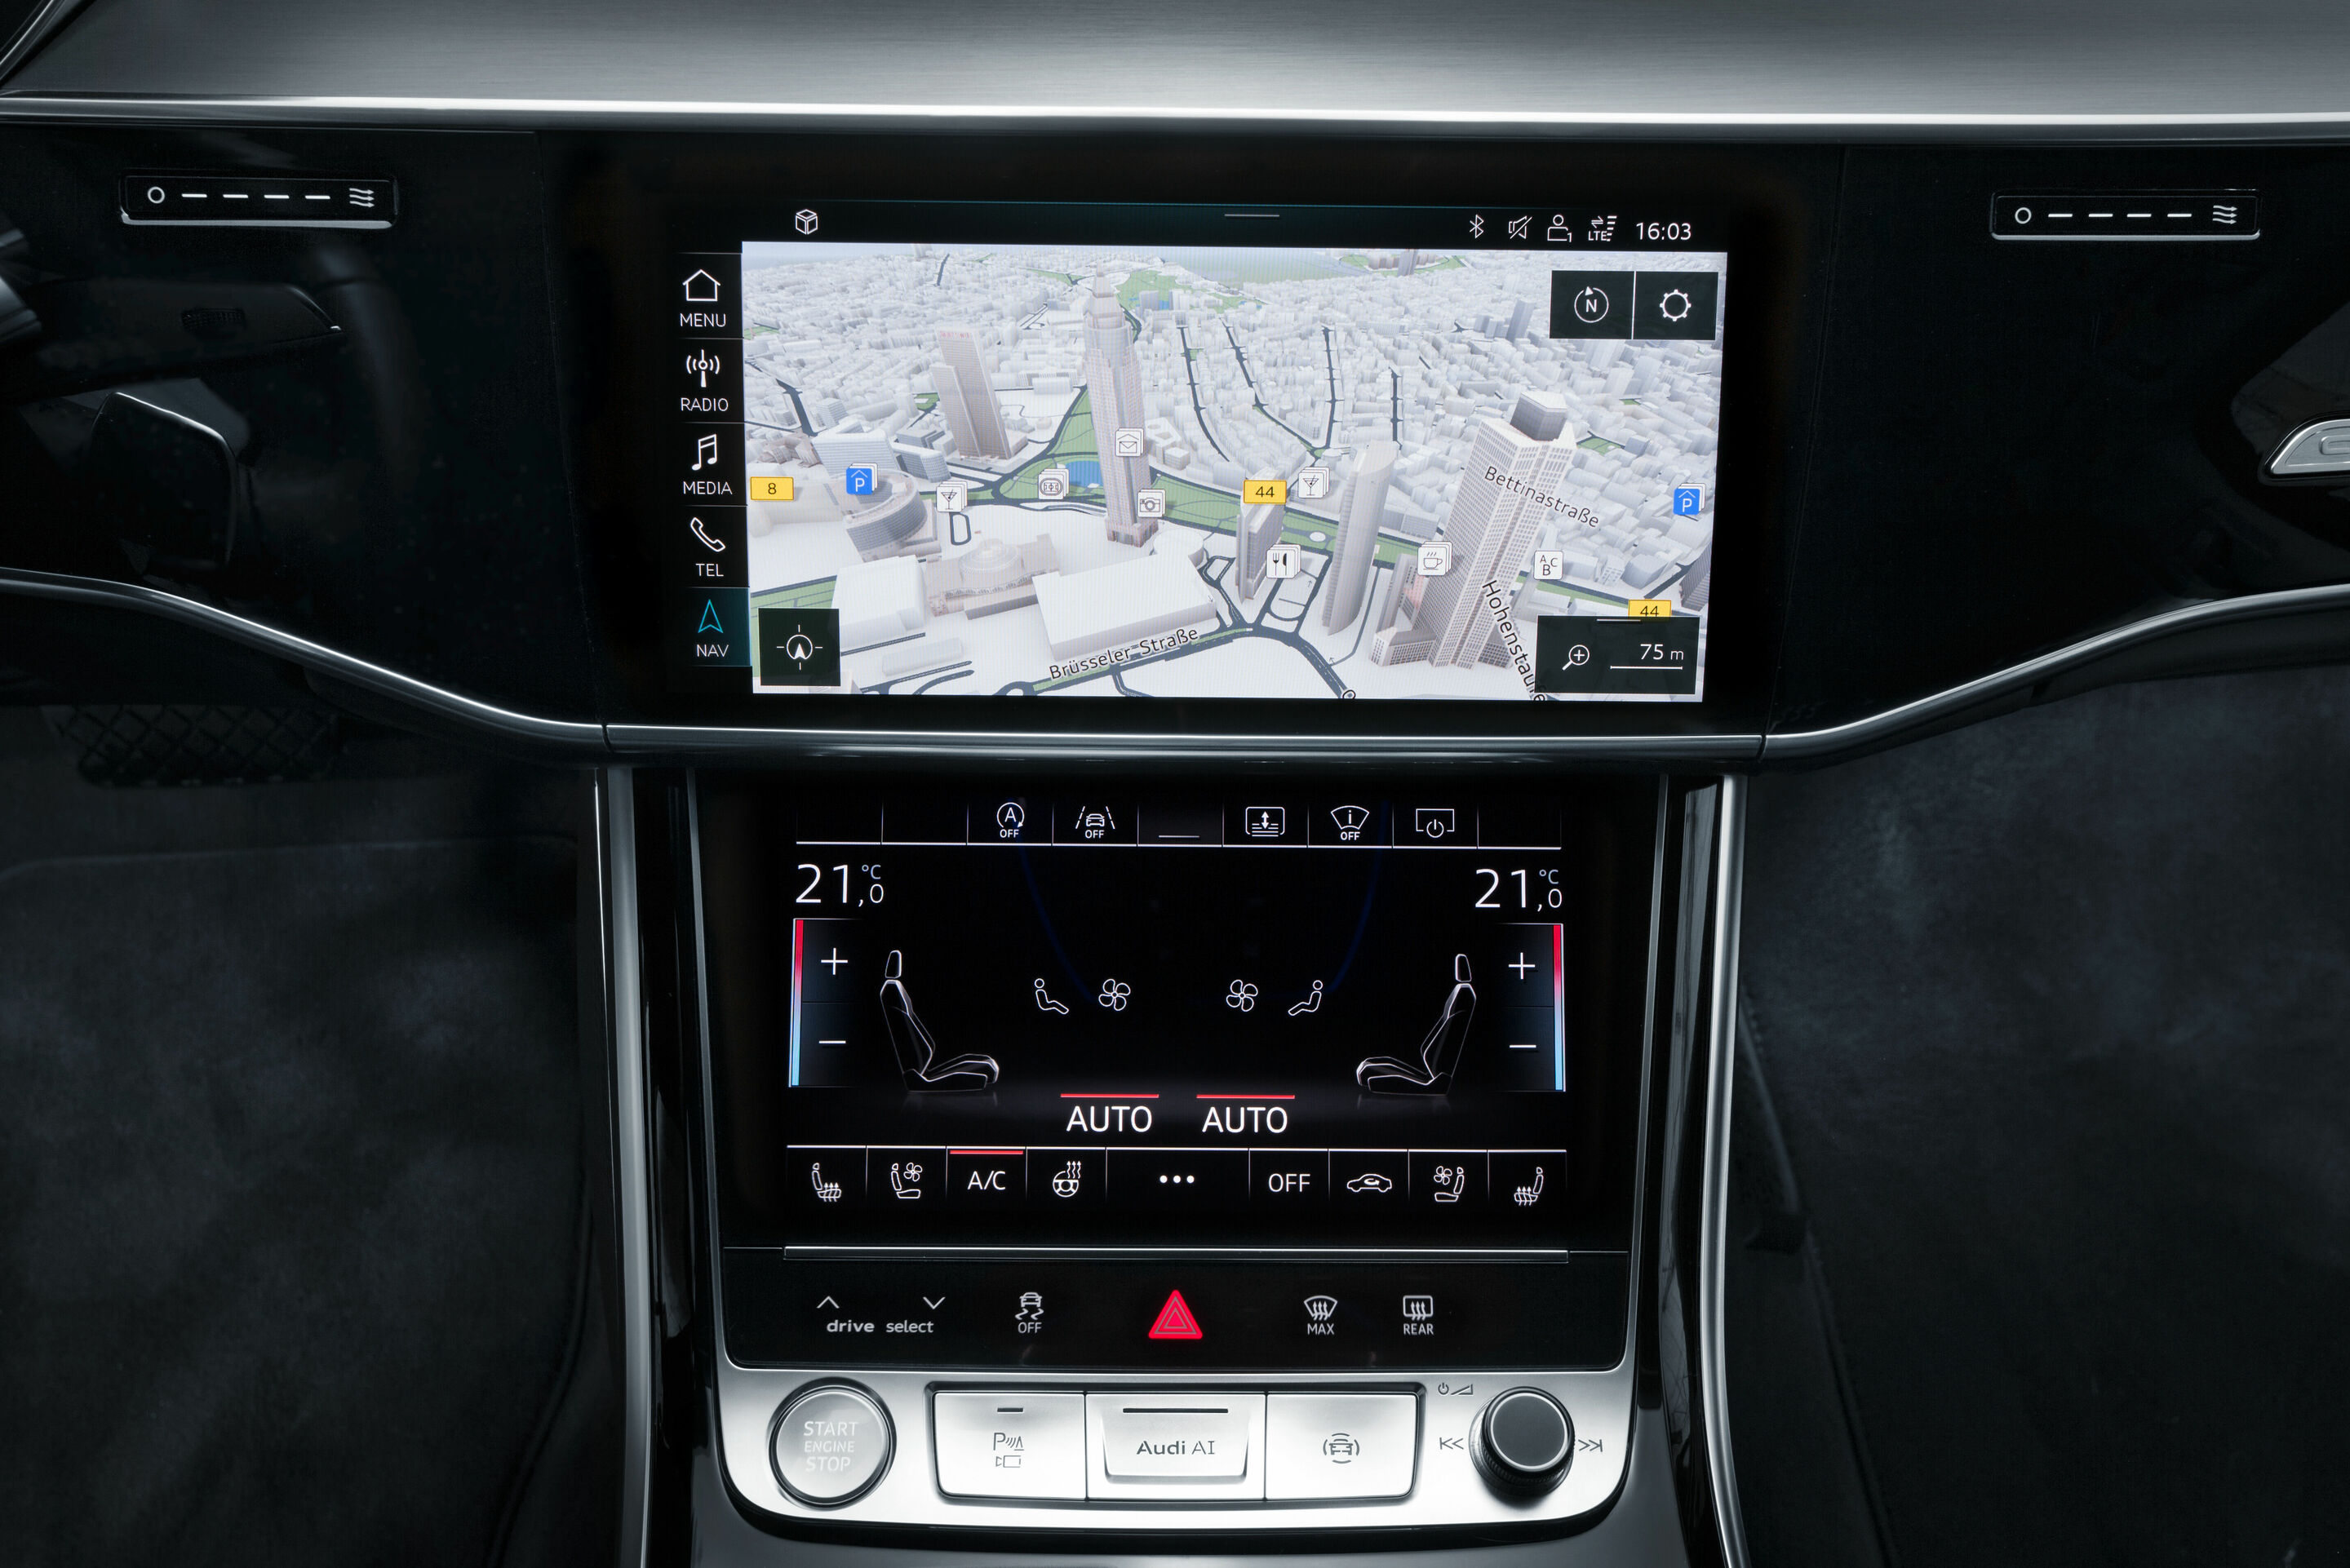 Navigation technology at the highest level: Audi and HERE developing hand in hand